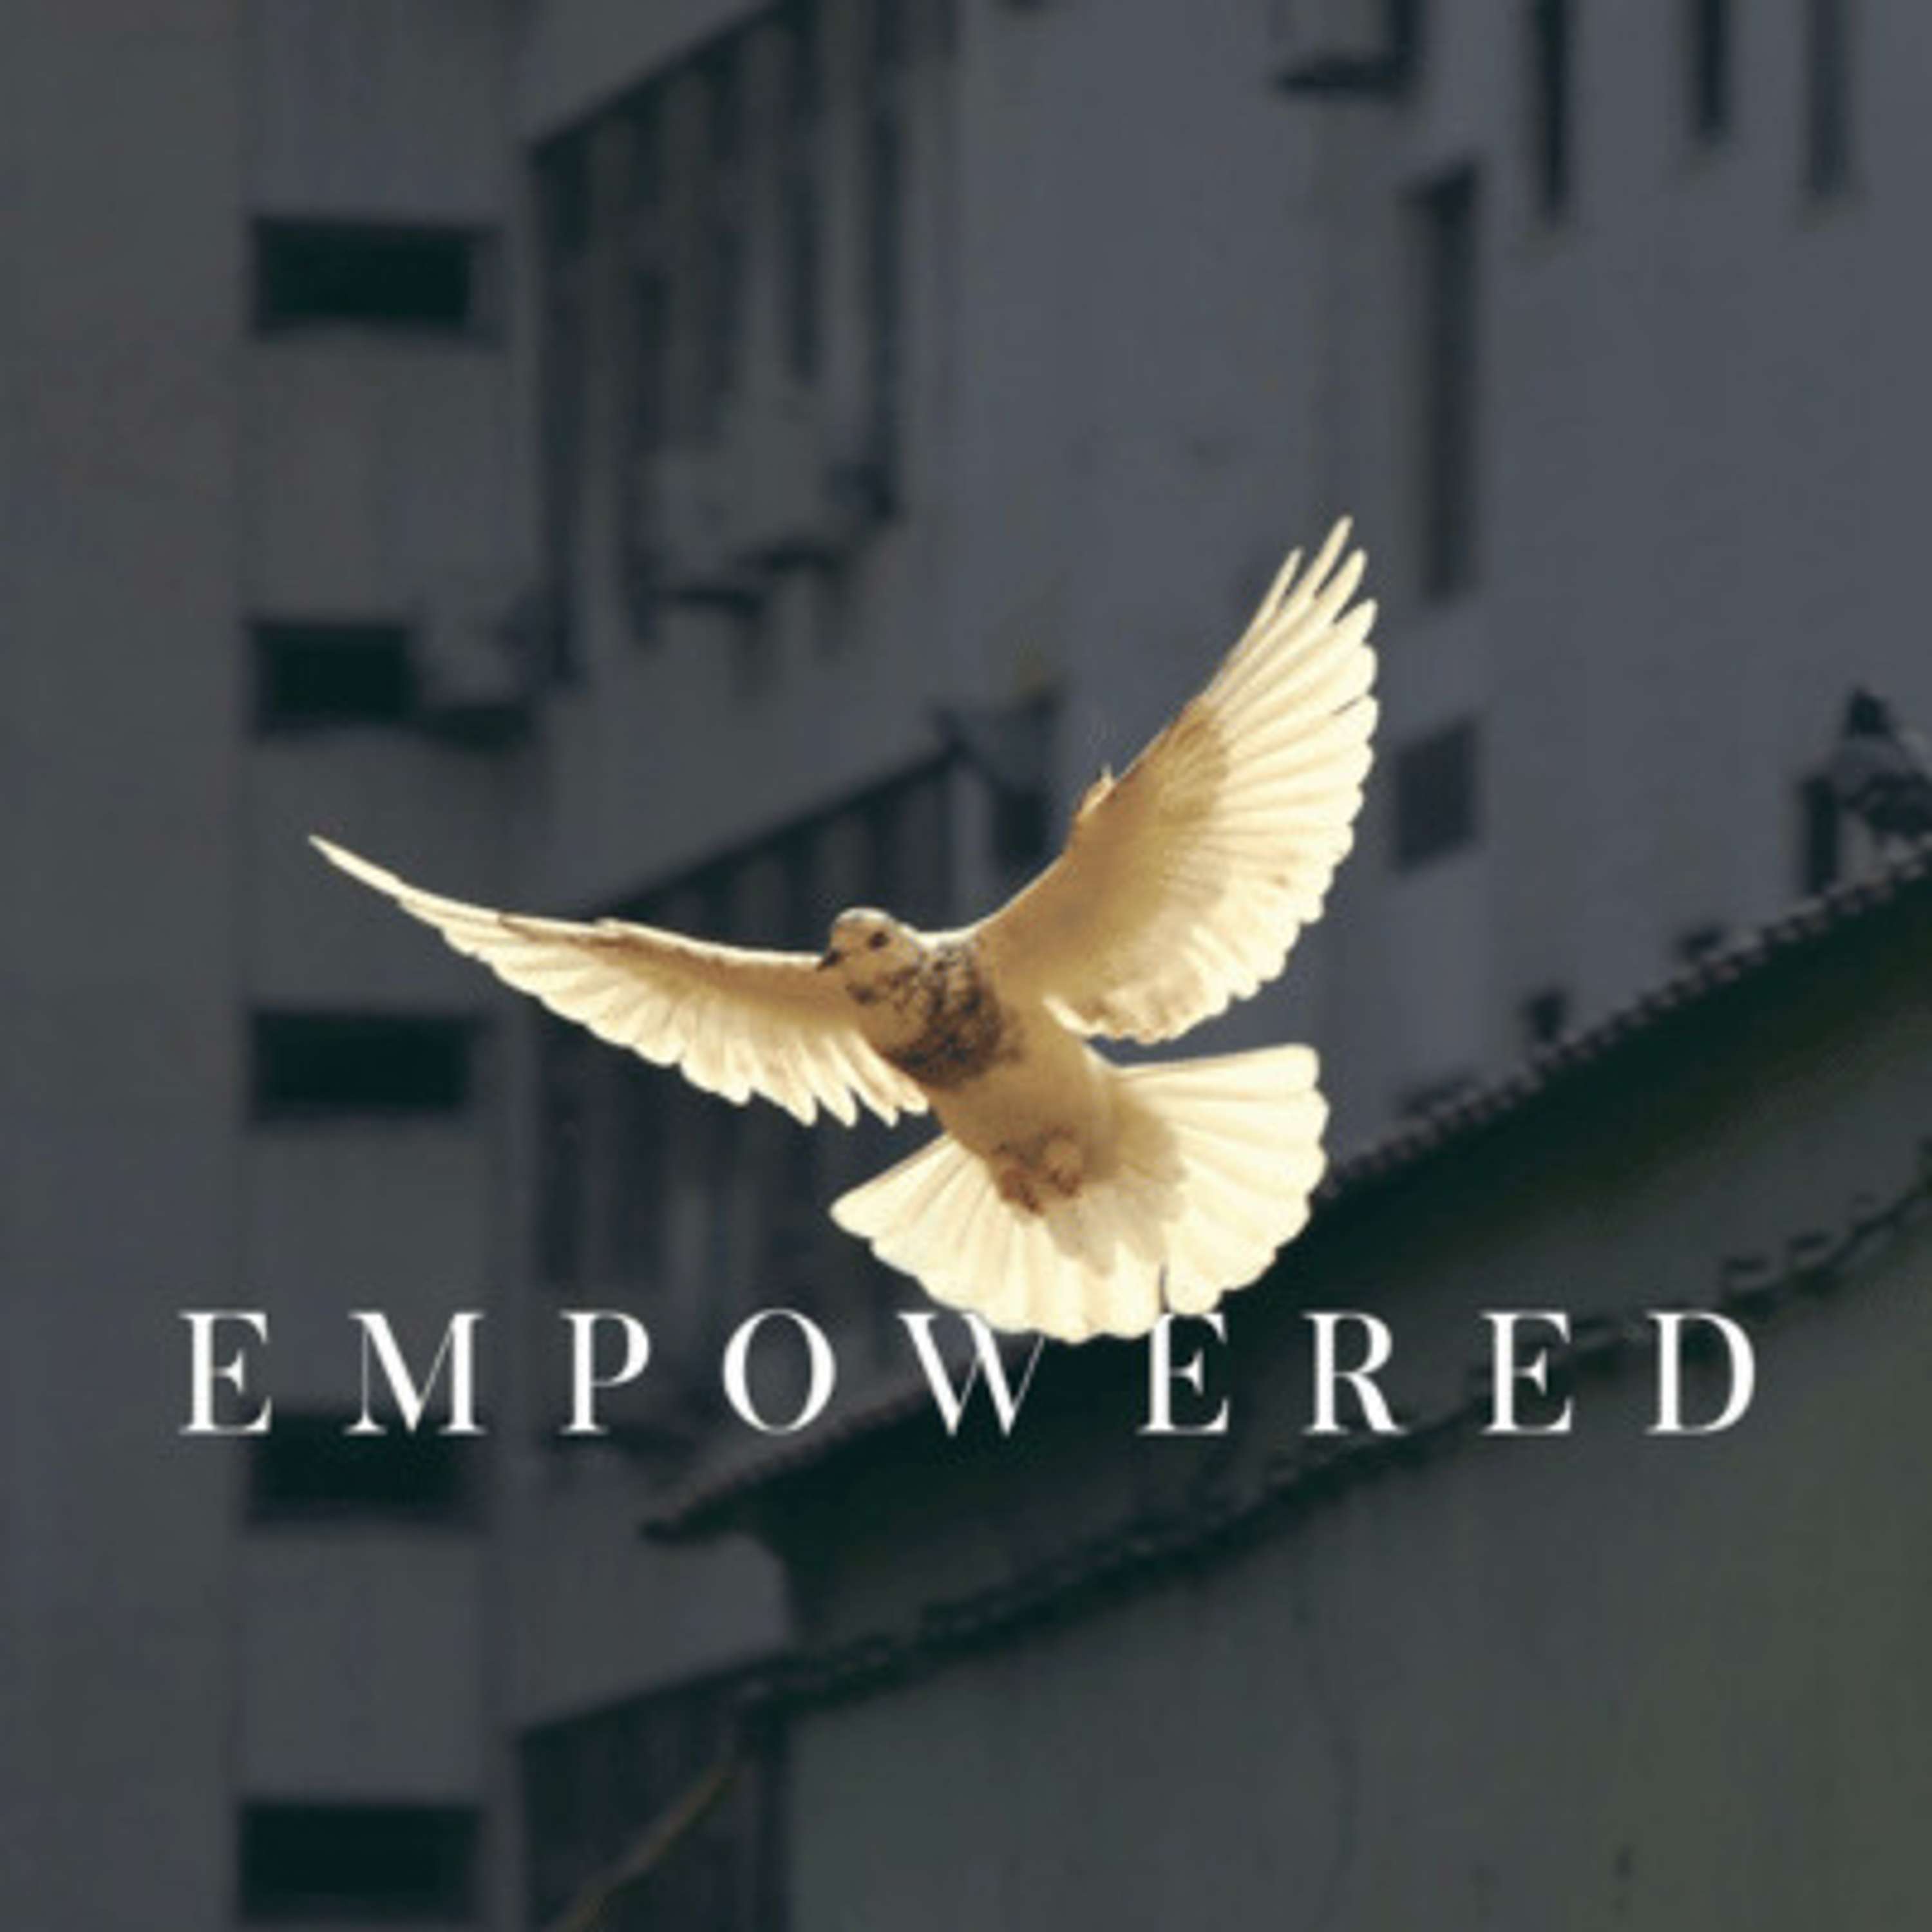 Empowered: Come, Holy Spirit